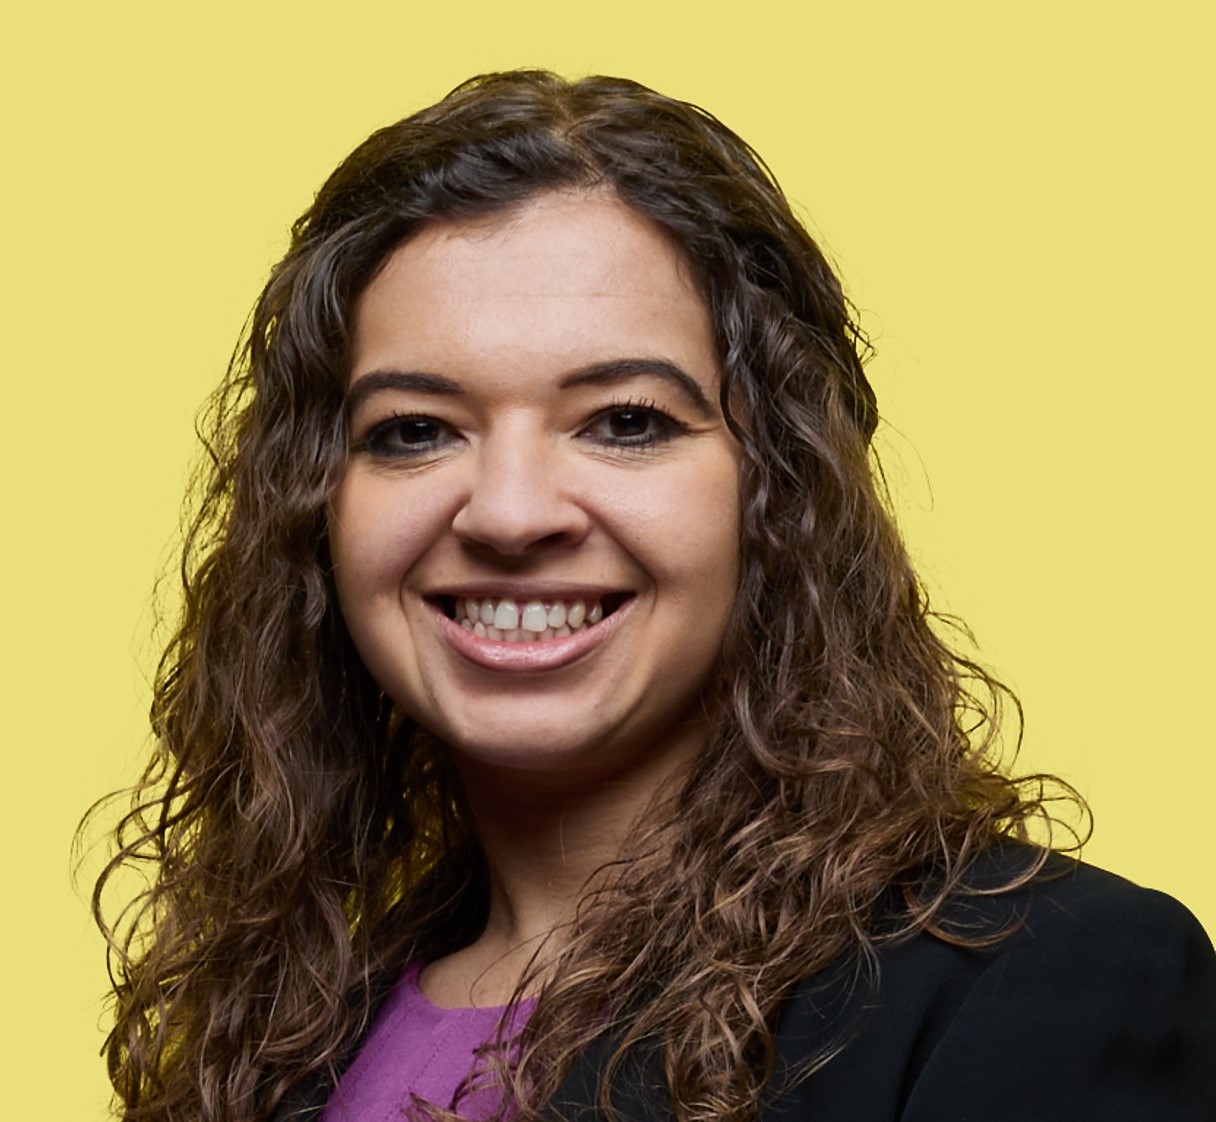 A woman smiling at the camera with a yellow background.